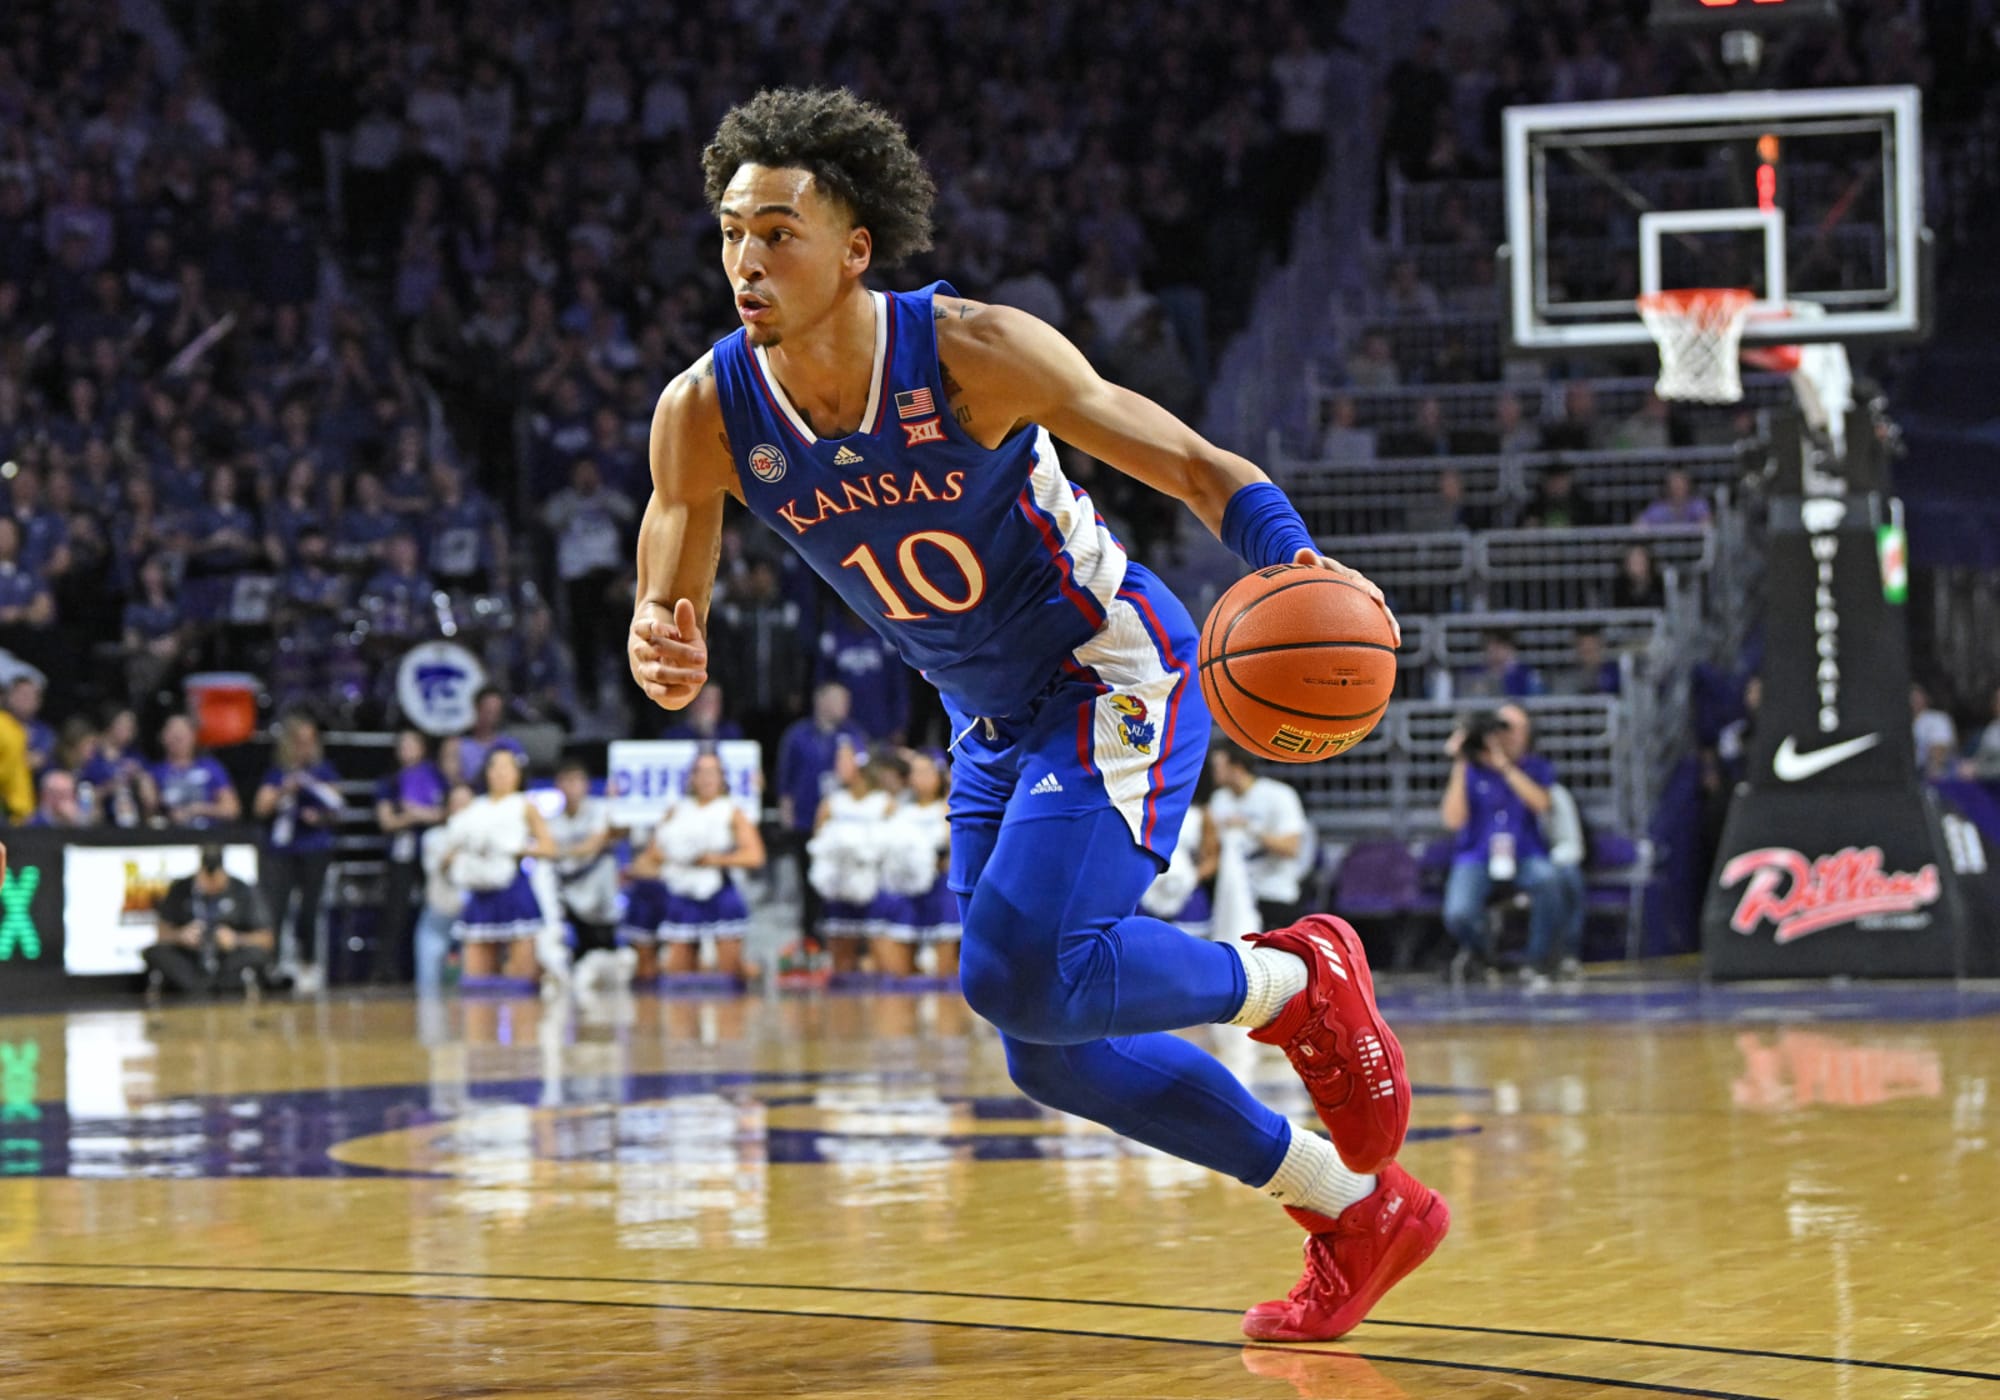 TCU at Kansas 2022-23 college basketball game preview, TV schedule